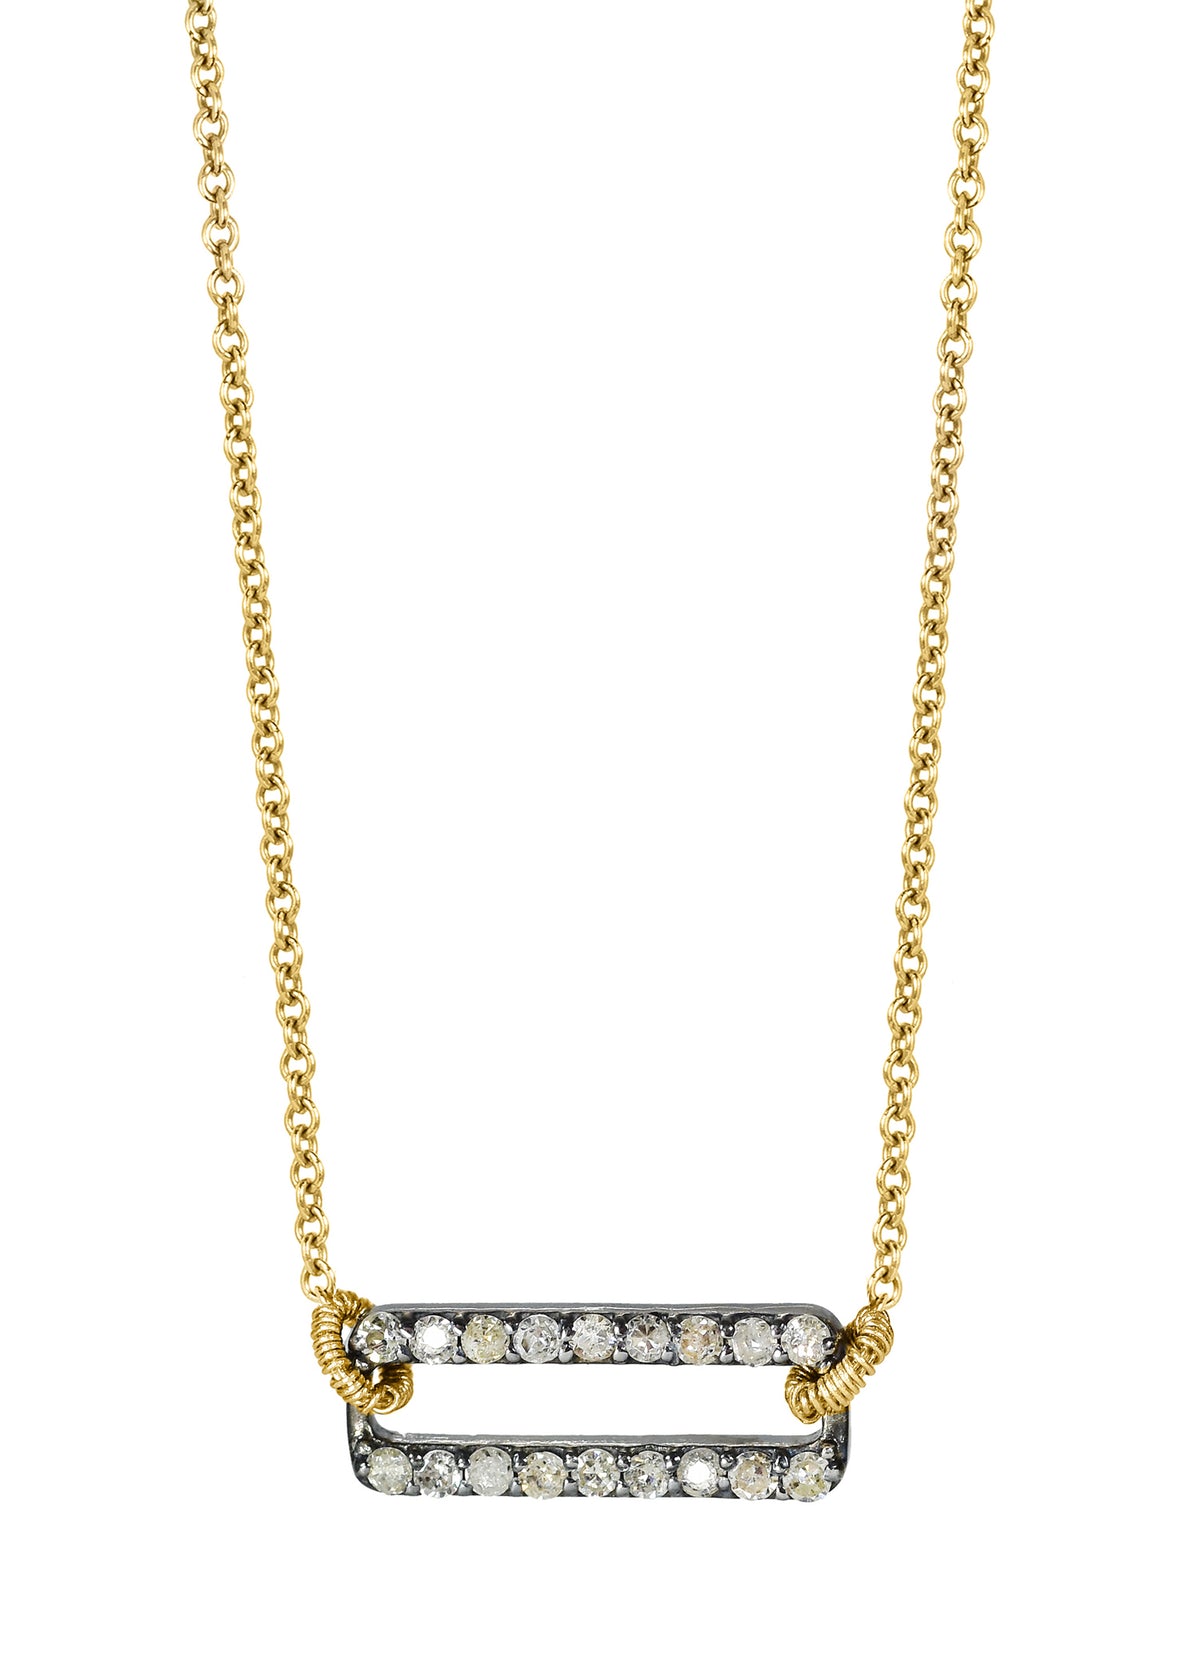 Diamond 14k gold Sterling silver Mixed metal Special order only Necklace measures 16&quot; in length Pendant measures 1/4&quot; in length and 5/8&quot; in width Handmade in our Los Angeles studio